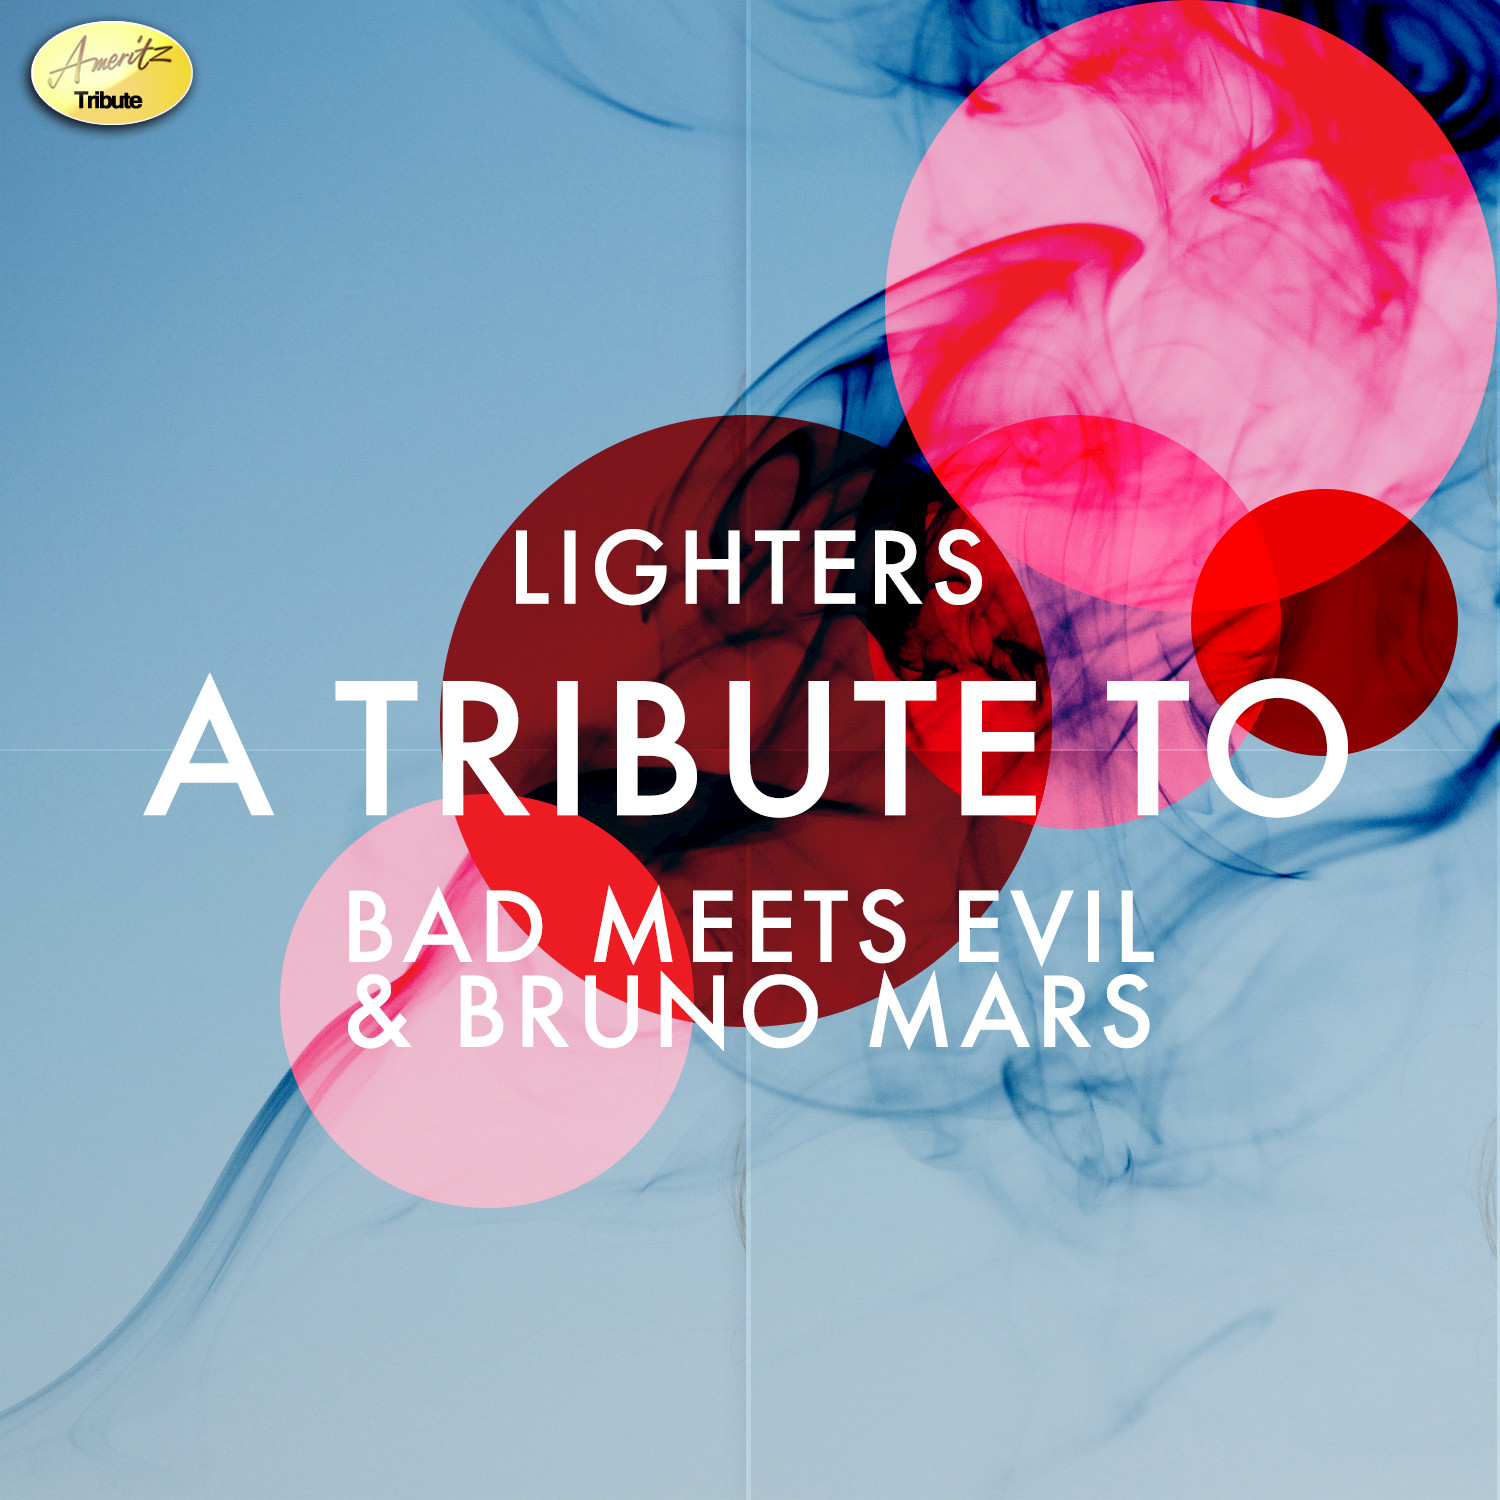 Lighters - A Tribute to Bad Meets Evil & Bruno Mars